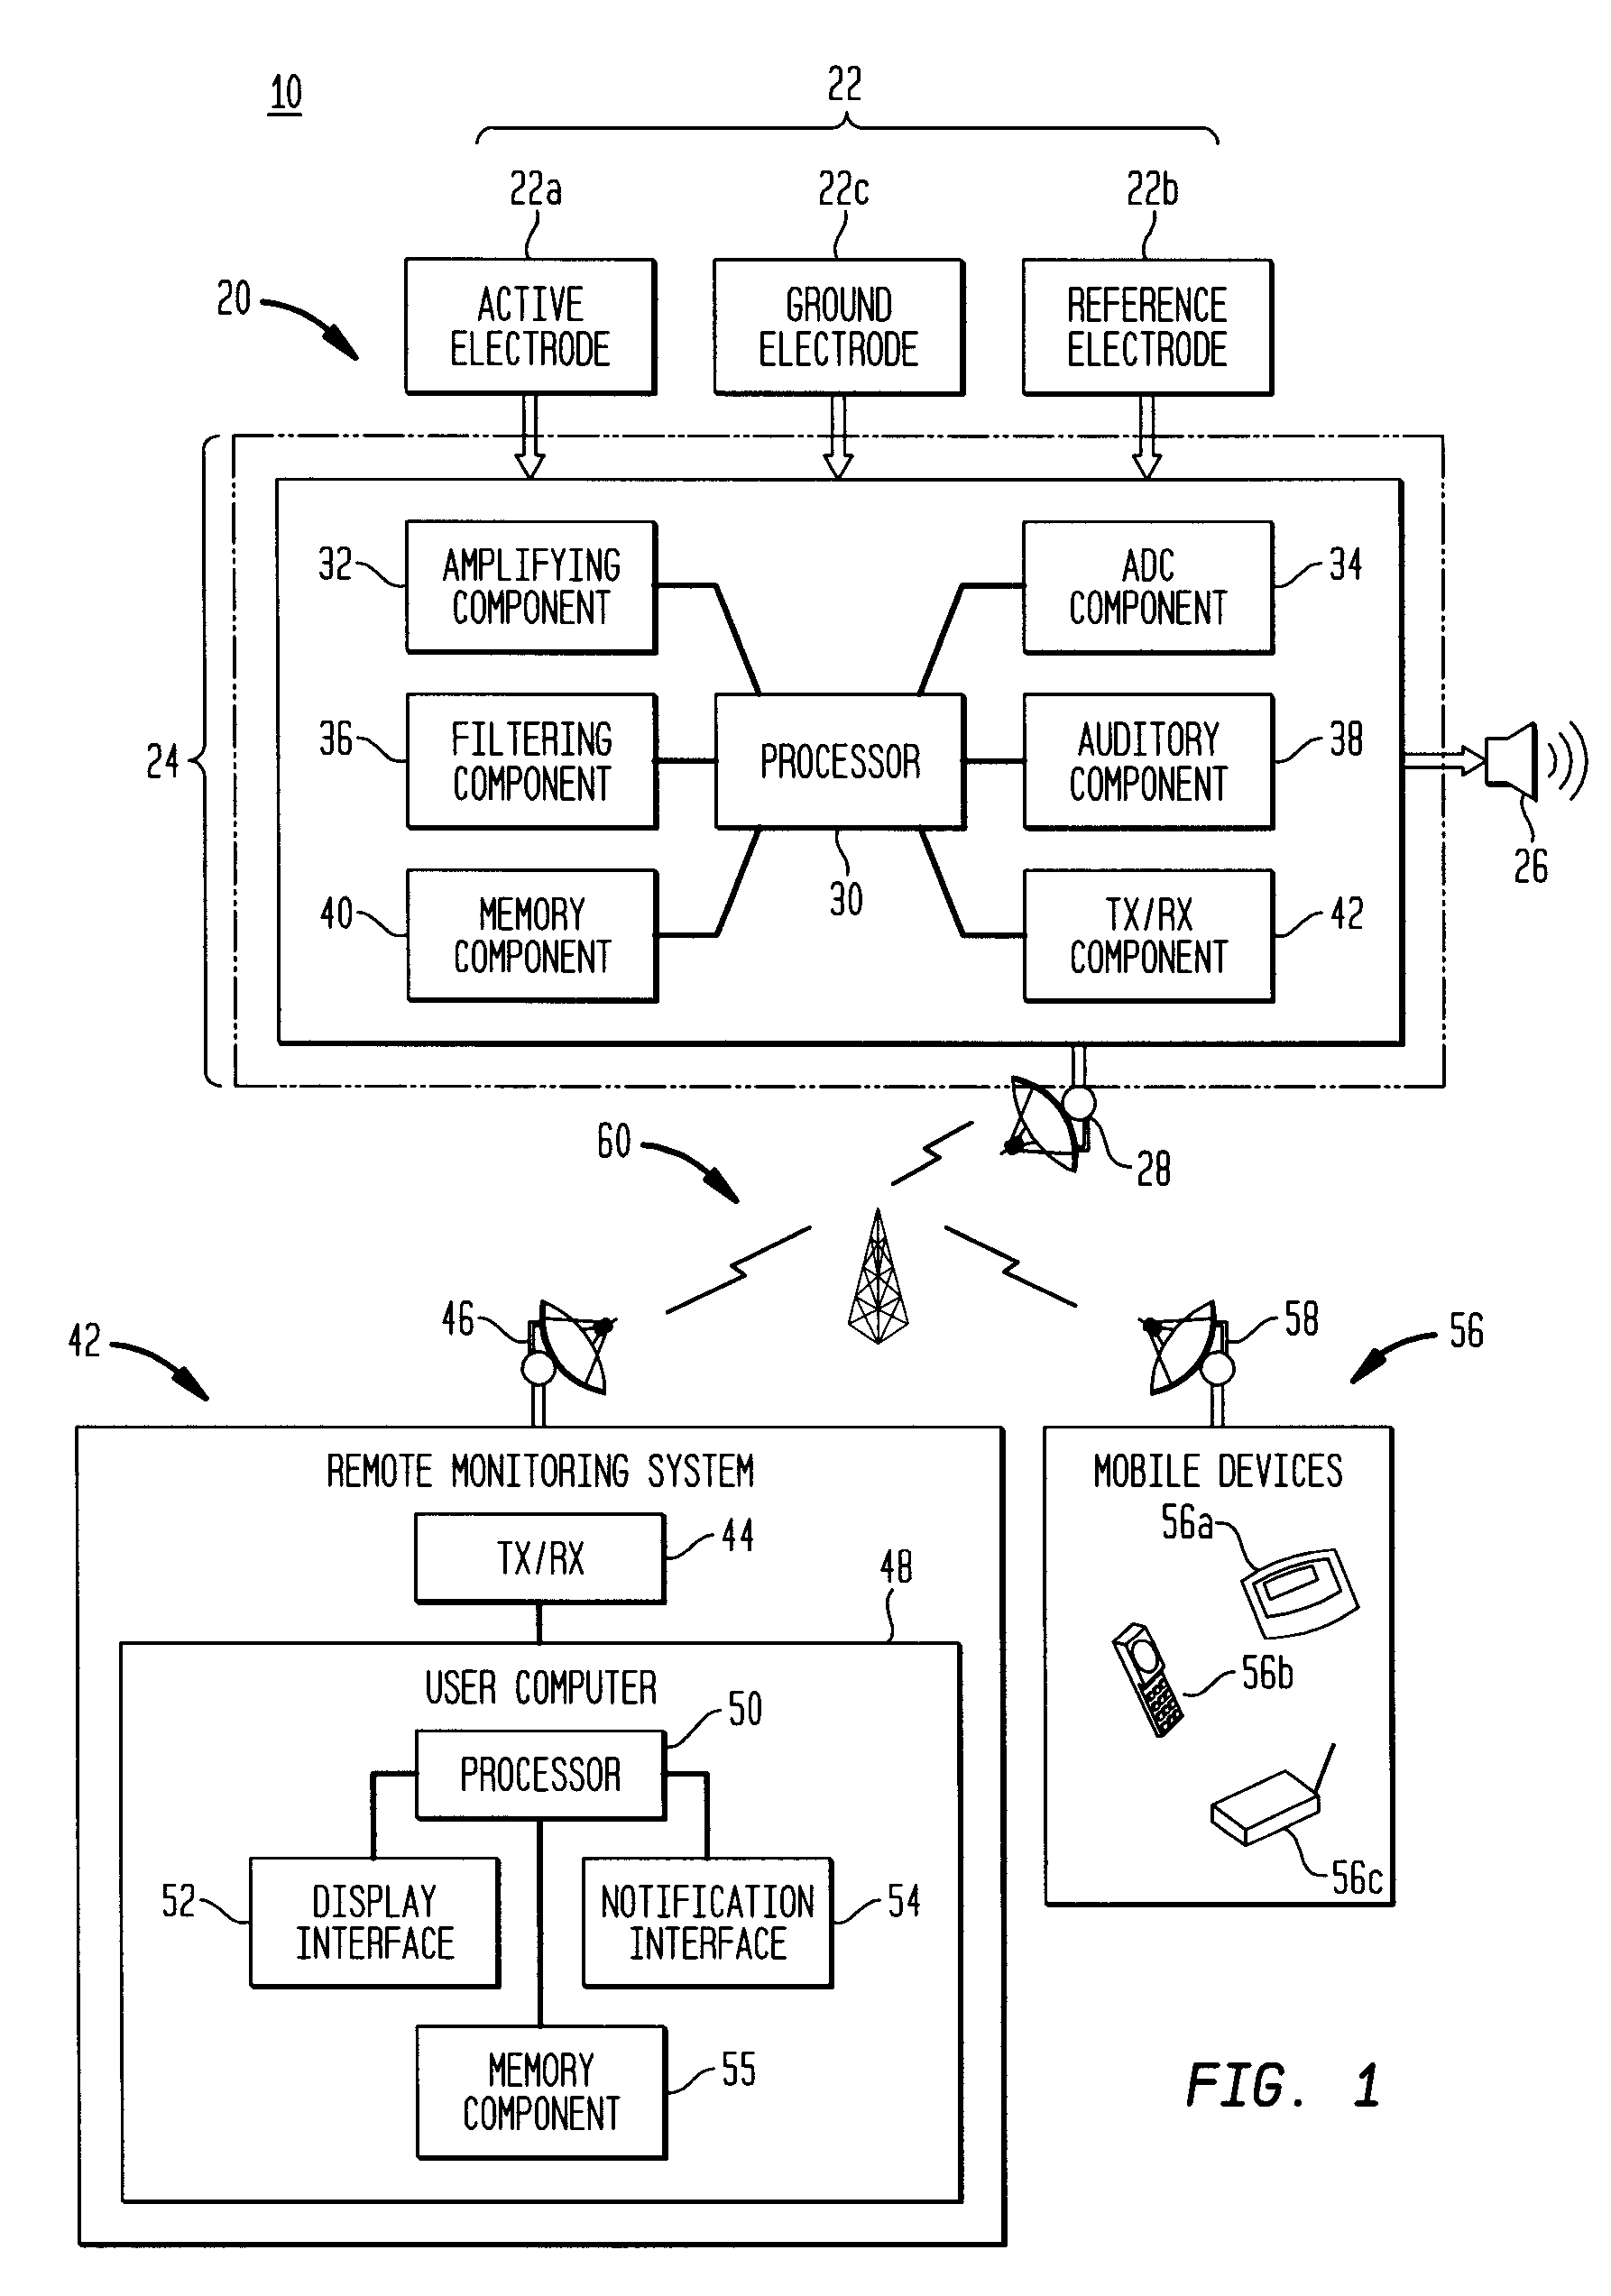 Apparatus and method for the measurement and monitoring of bioelectric signal patterns